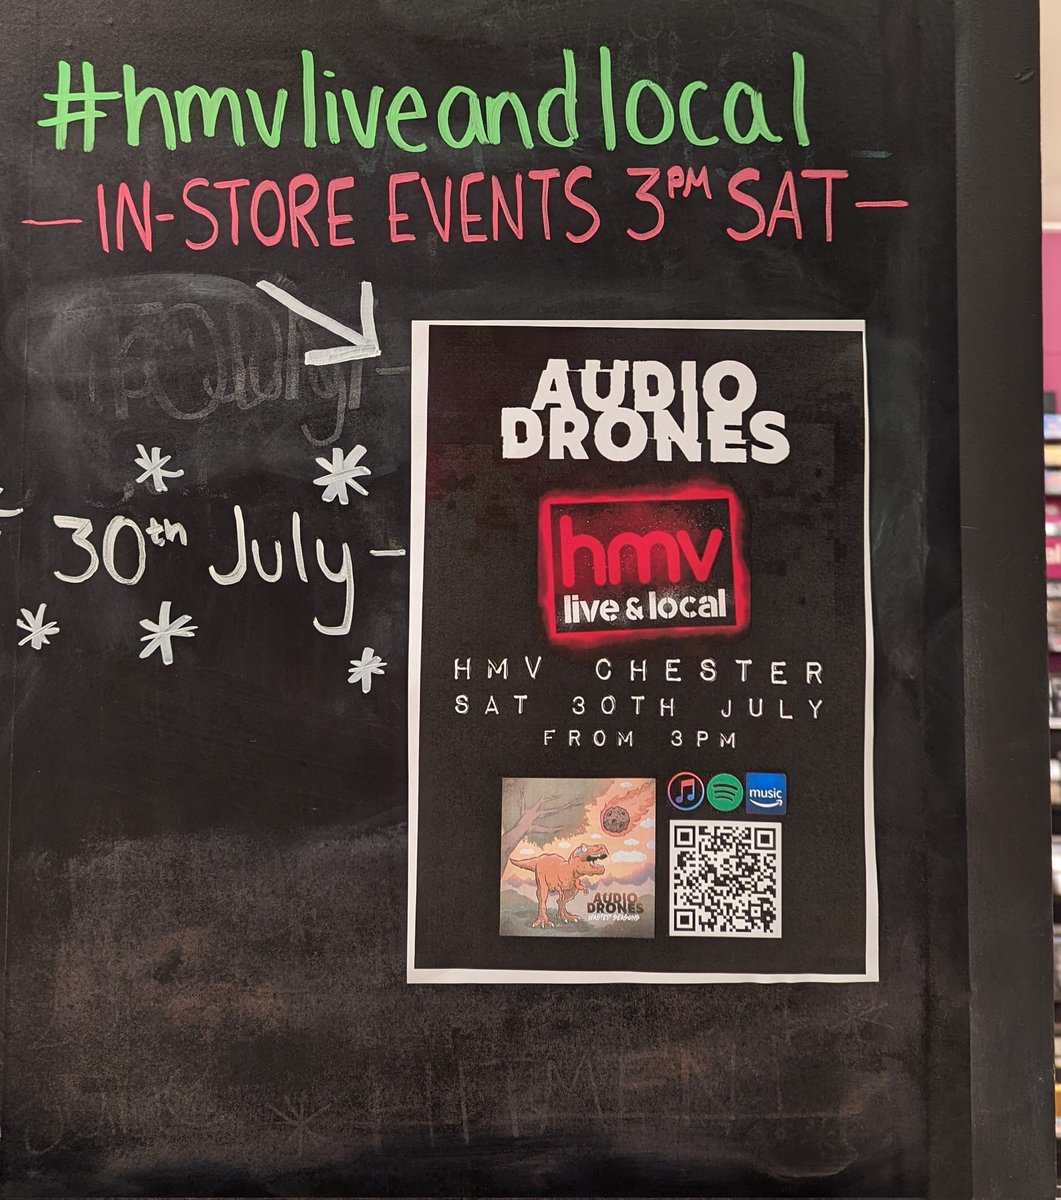 We've no live and local this weekend I'm afraid, however the week after we have @audiodrones performing in-store down in the basement @hmvChester from 3pm. Be sure to come on down and check out the vibe. #hmvliveandlocal